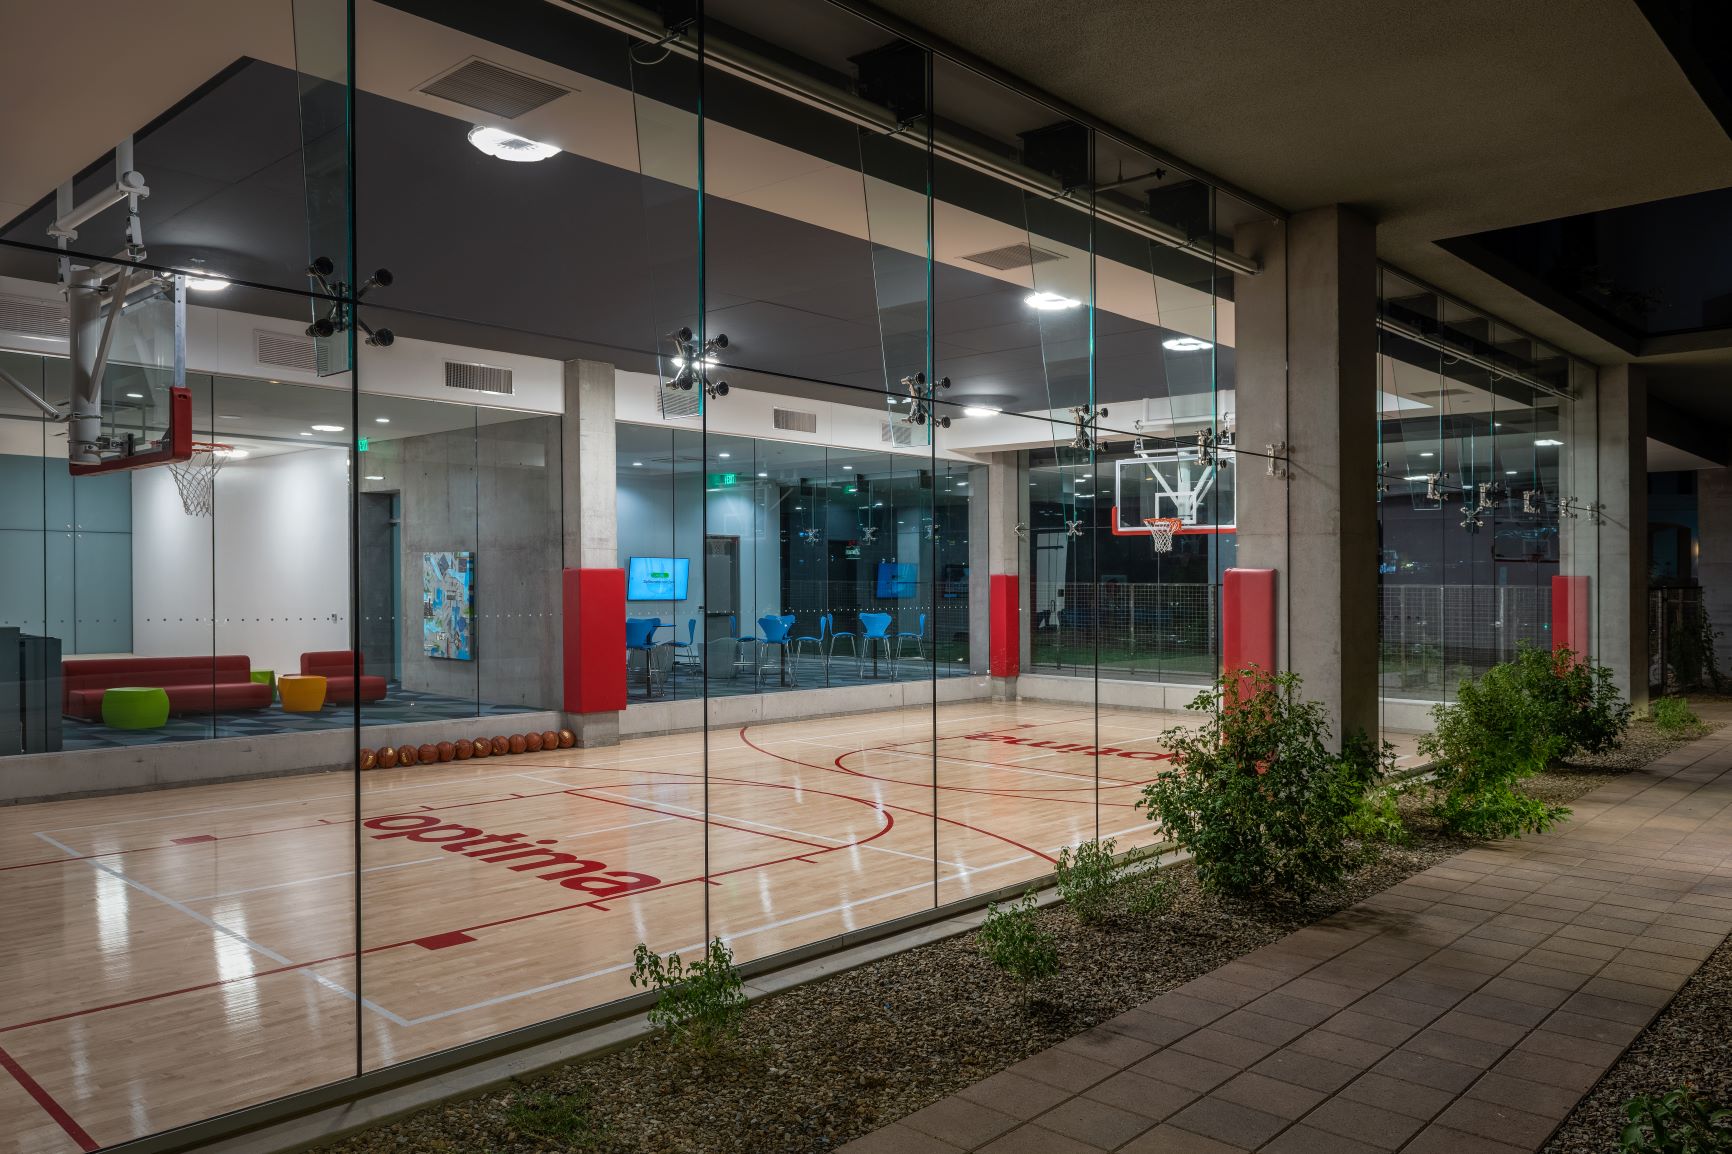 Gym with Basketball Court Near Me